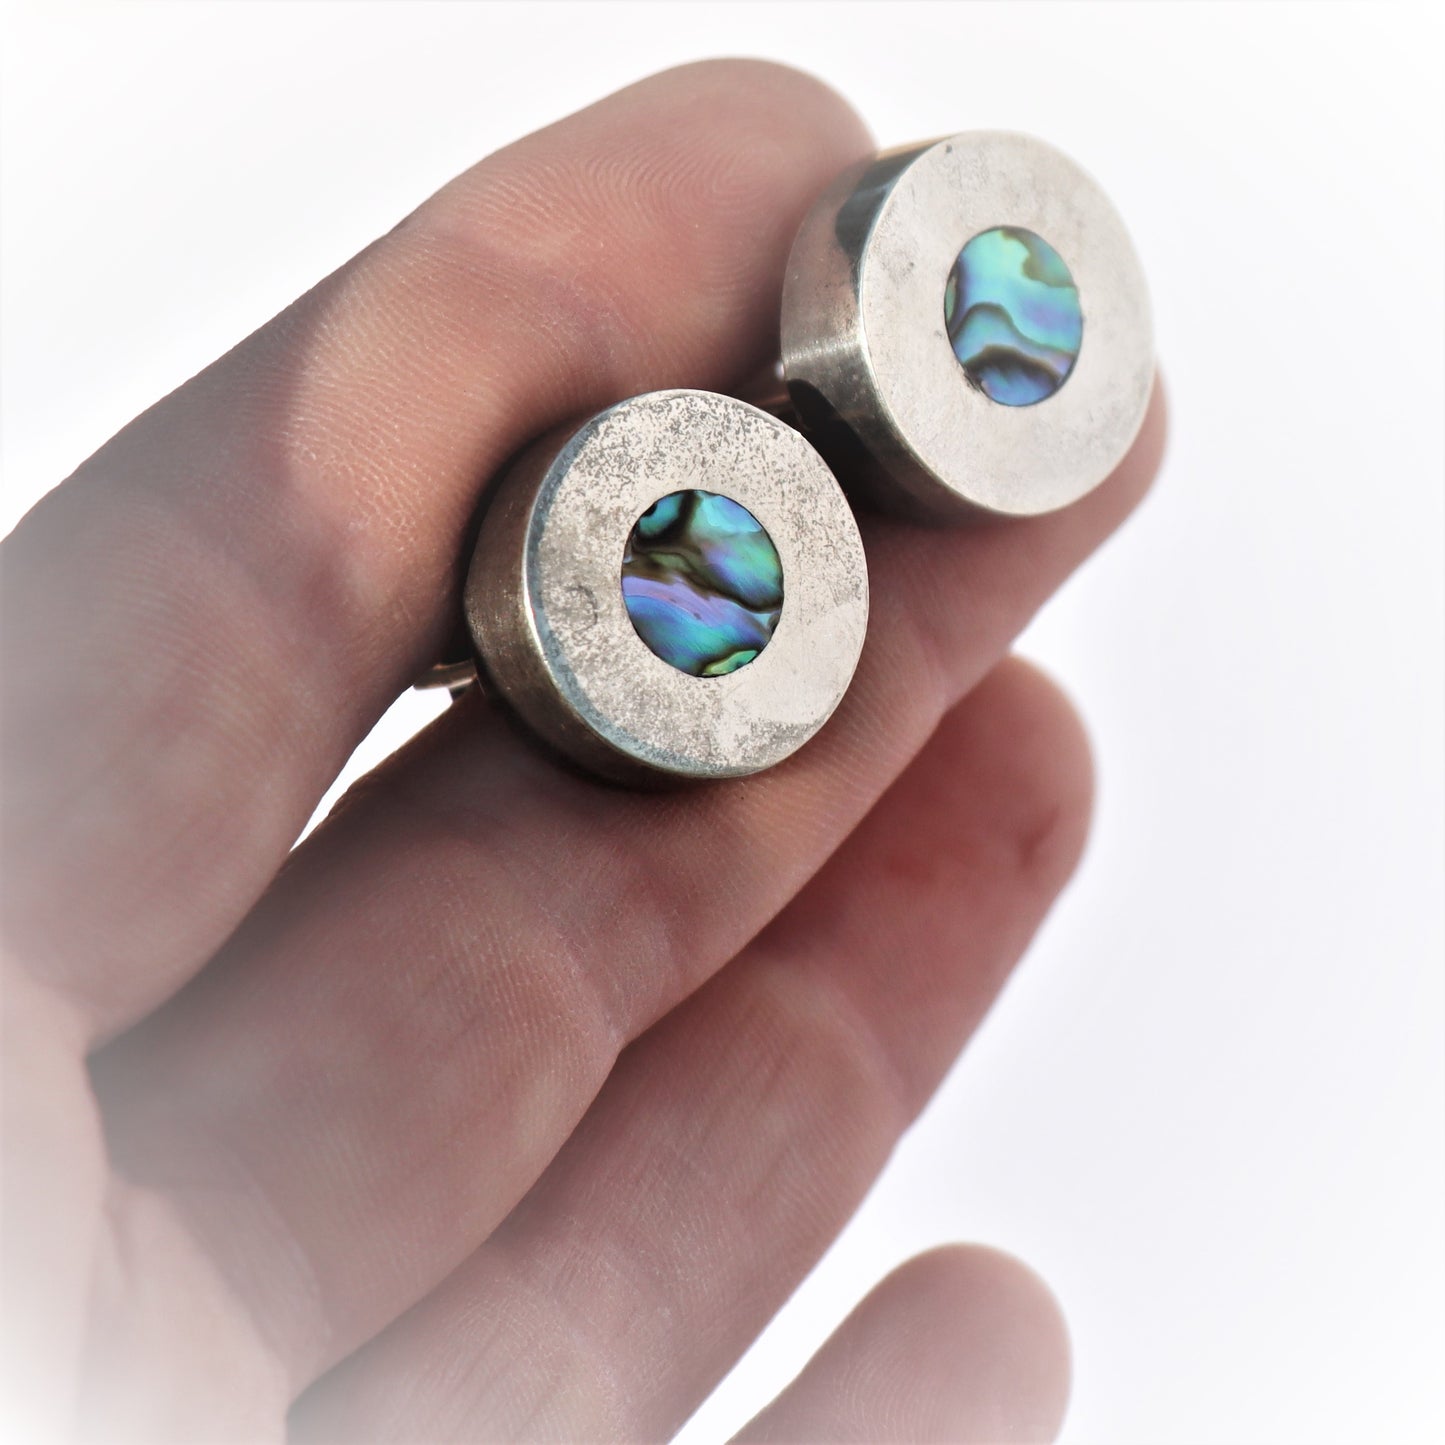 Mid Century Modern Sterling Silver Taxco Abalone Inlay Cufflinks c1970 Signed